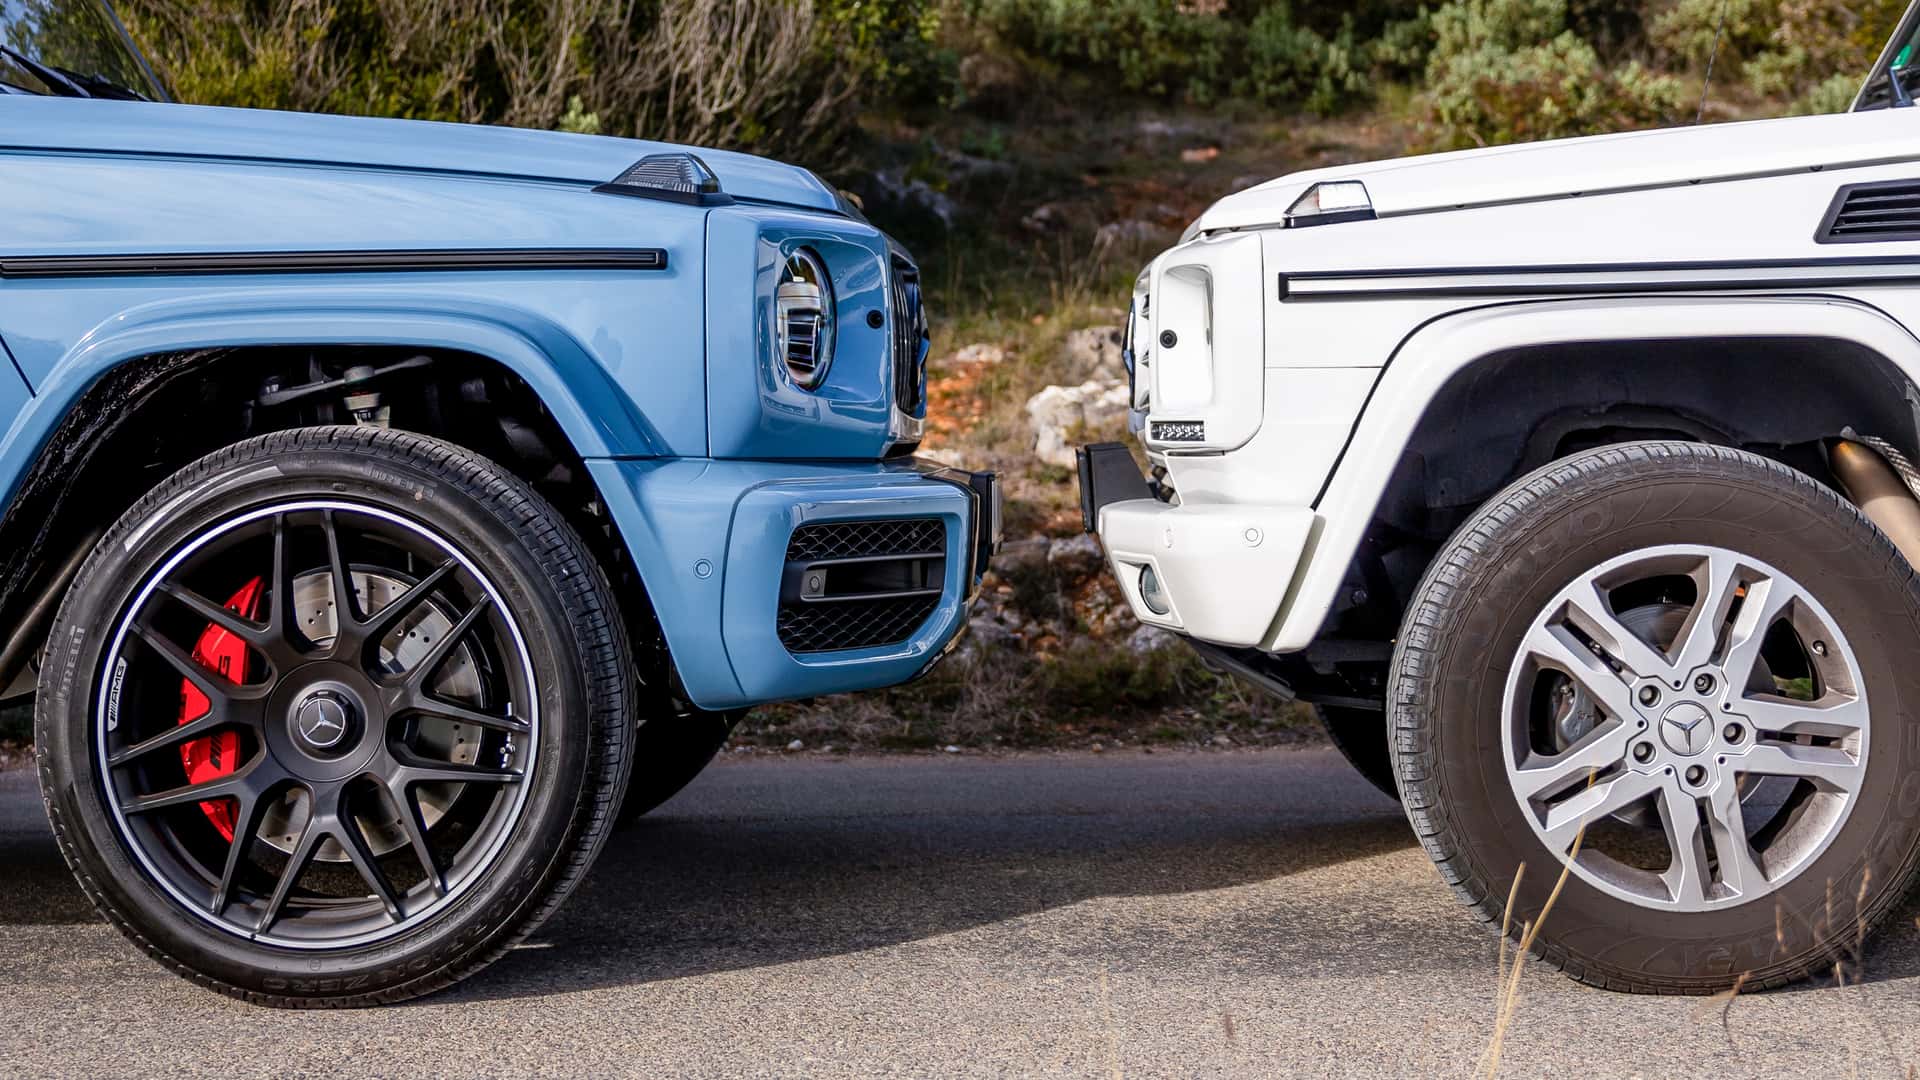 the-13-million-mercedes-benz-g-class-is-convertible-and-has-suicide-doors_3.jpg